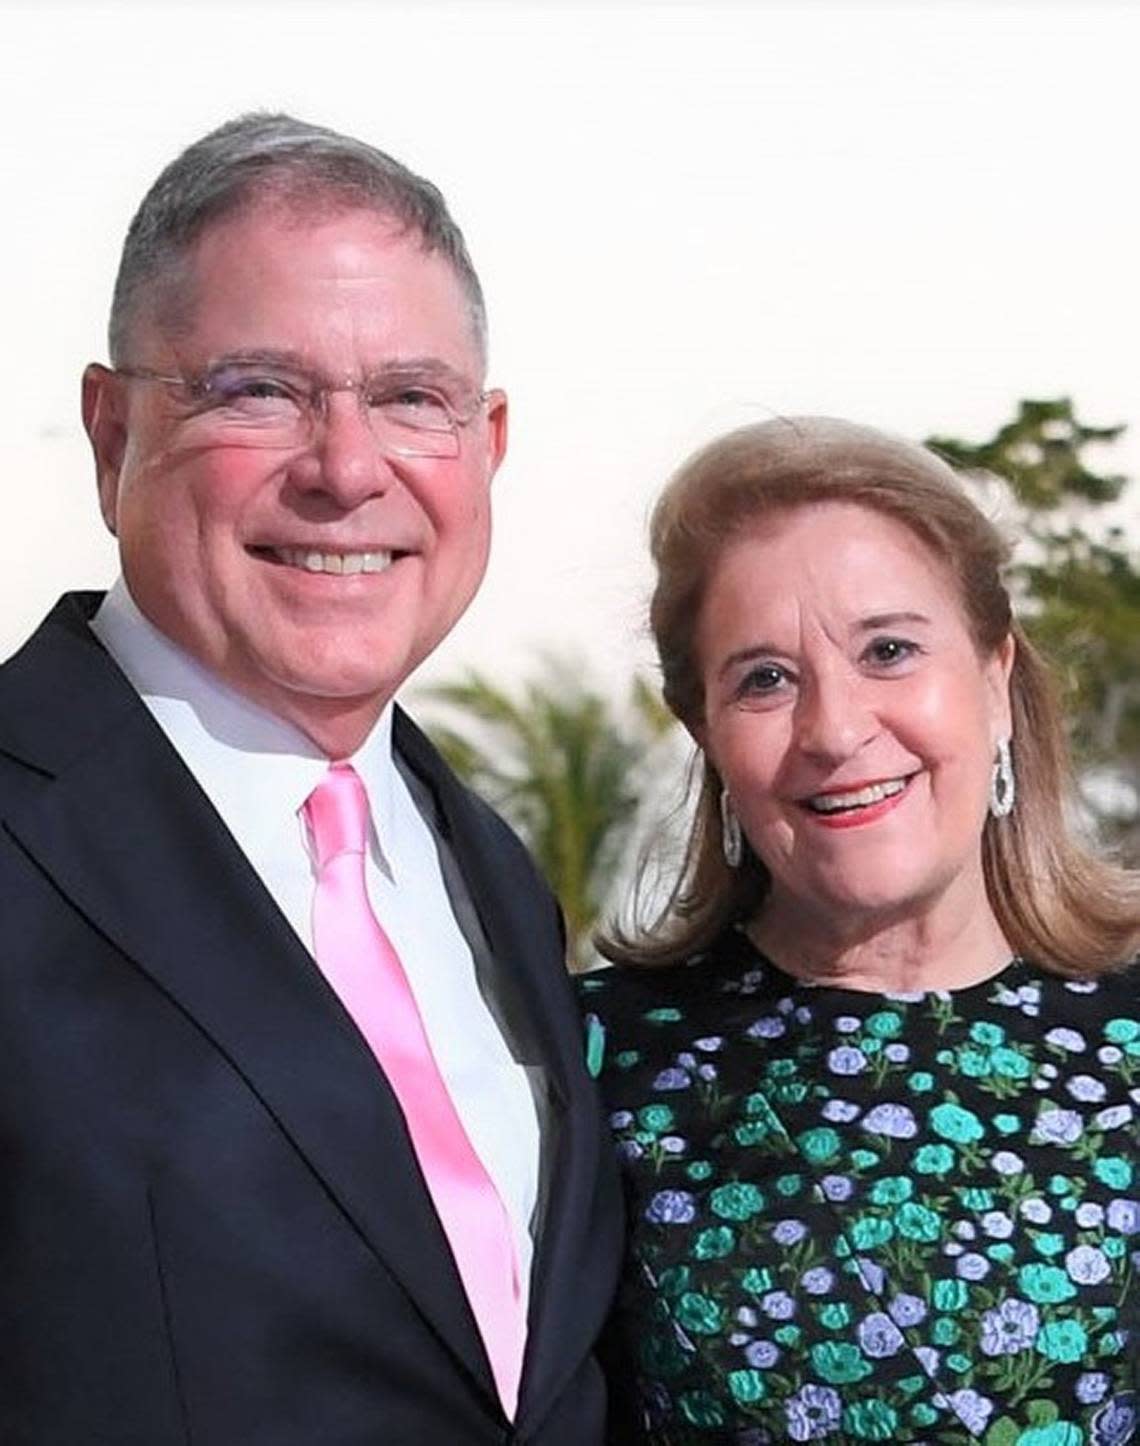 Alberto Ibargüen and Susana Ibargüen were married for 53 years. ‘I think she saw clearer than most that arts and culture really do define a place and a community,’ her husband said for her obituary in 2021. Susana was a board president and trustee emeritus of Pérez Art Museum Miami.